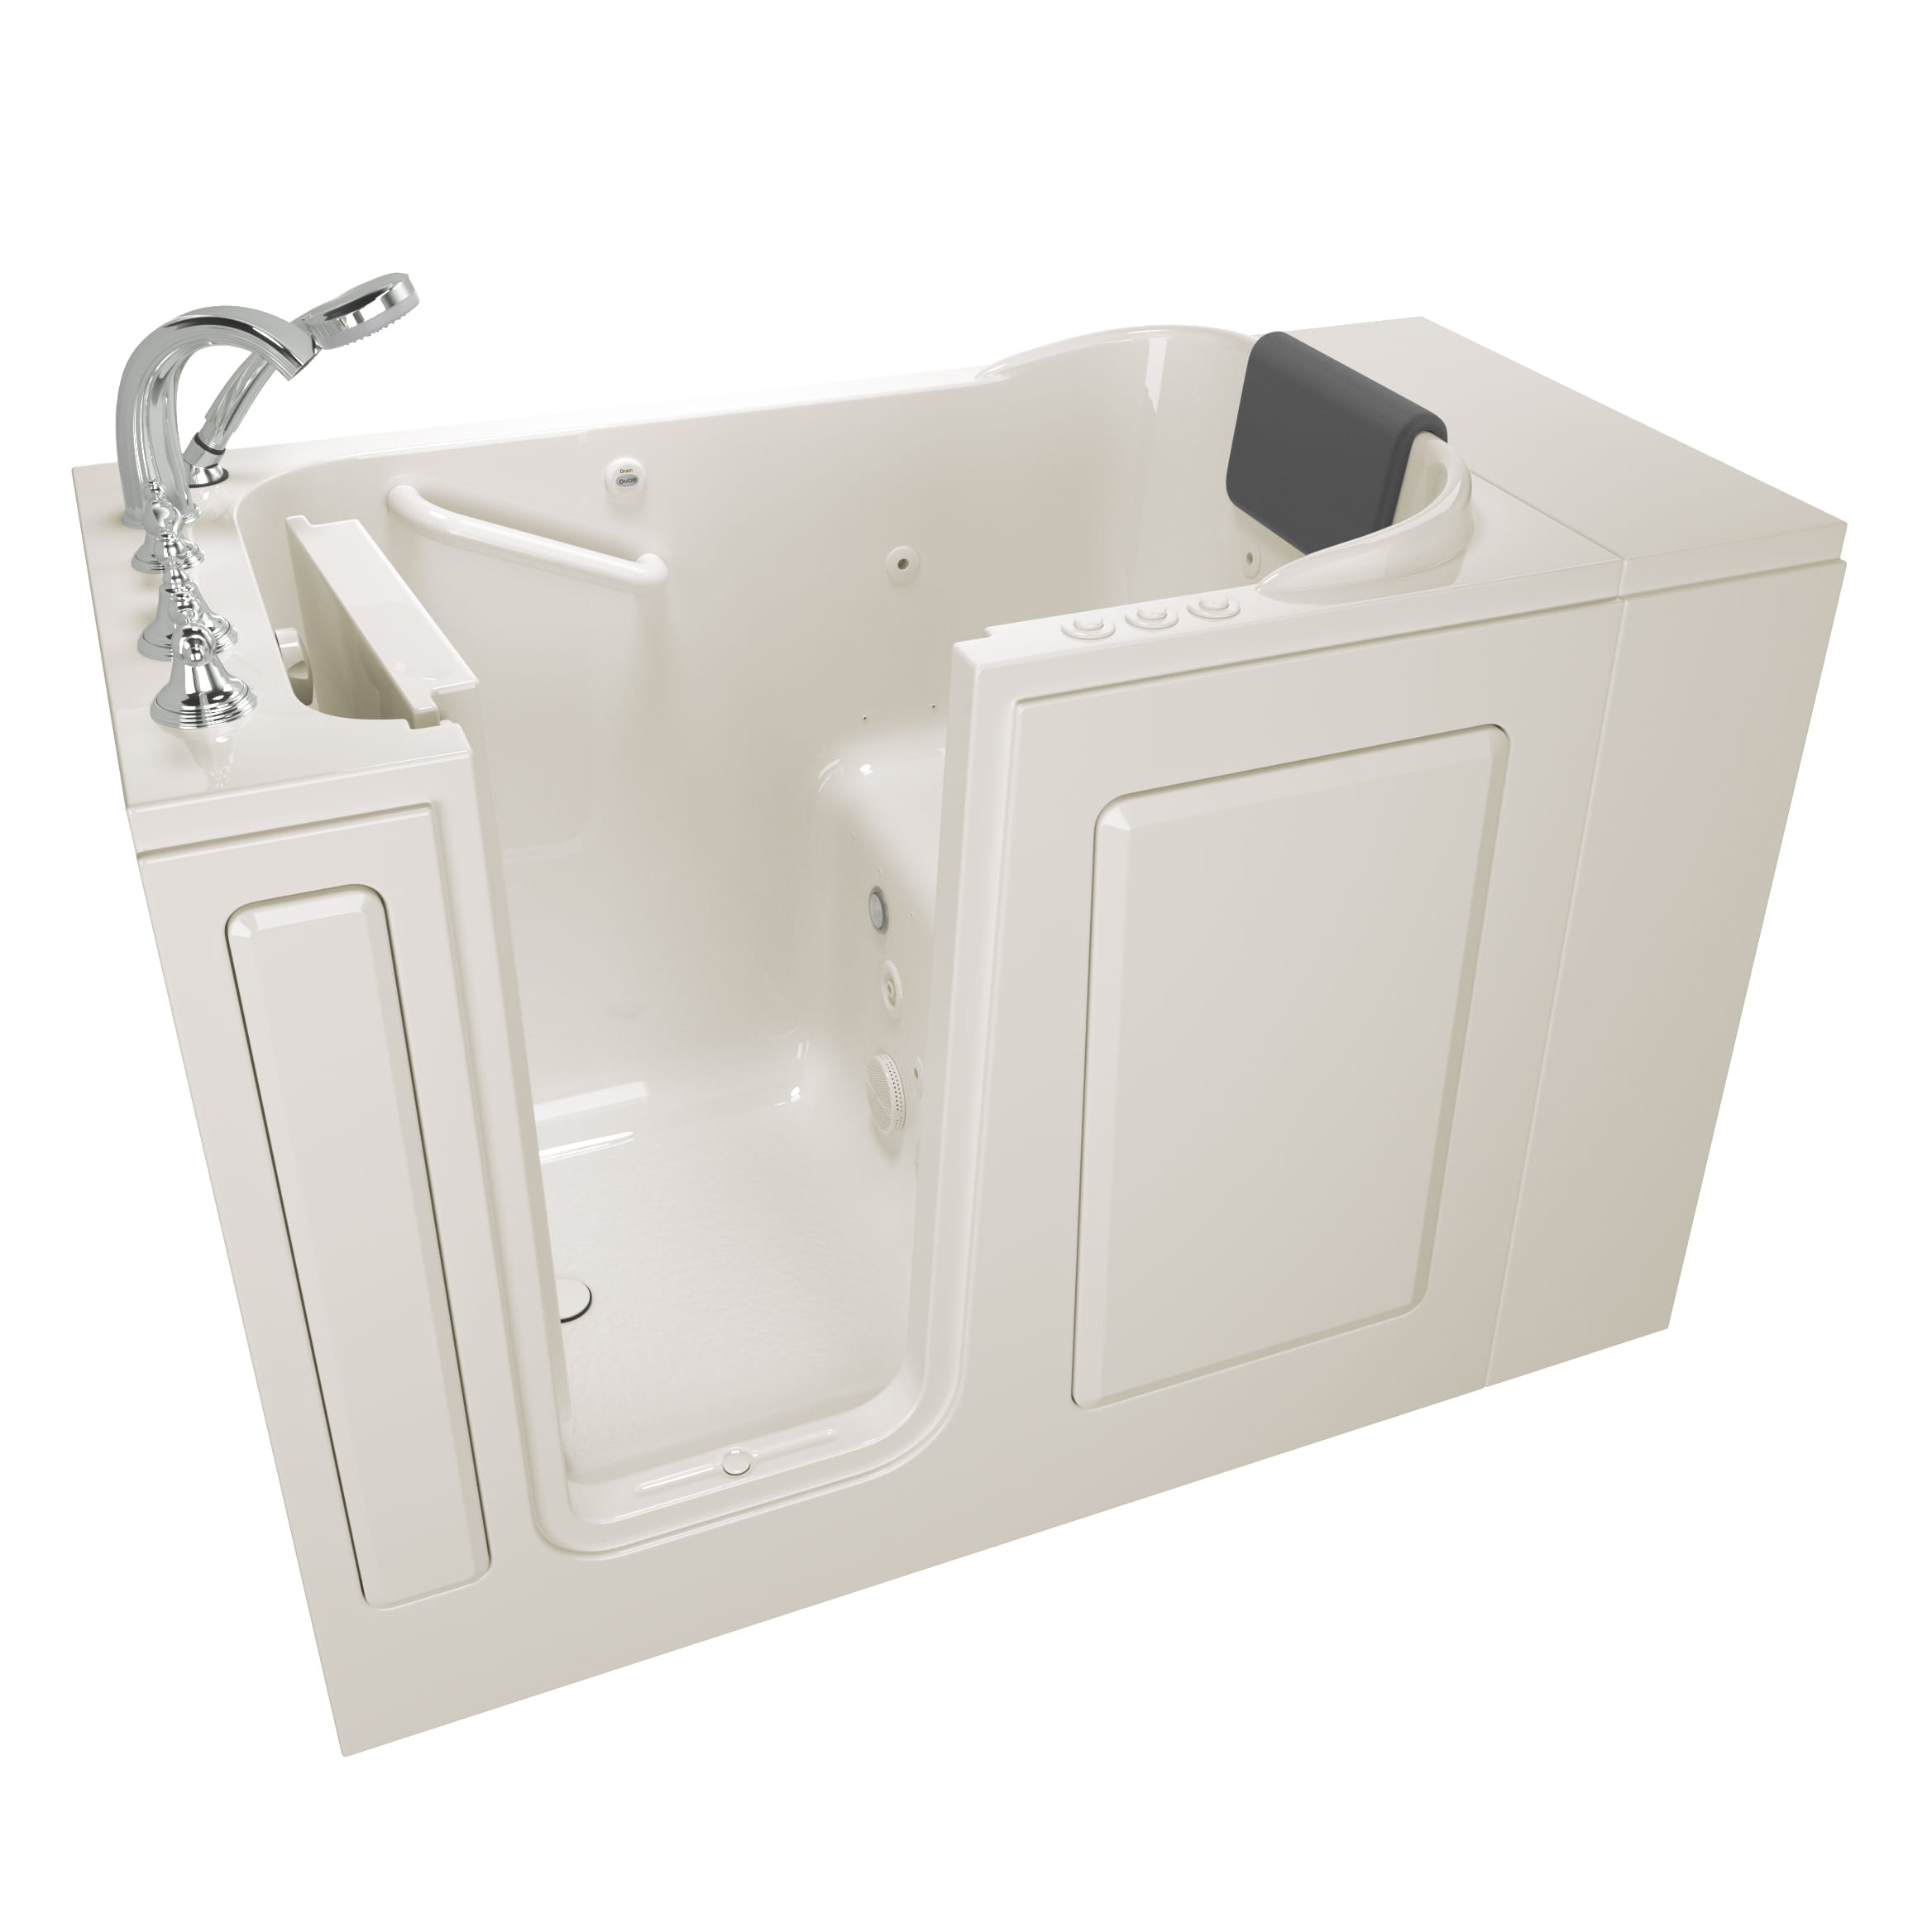 Gelcoat Premium Series 28 x 48 Inch Walk in Tub With Combination Air Spa and Whirlpool Systems   Left Hand Drain With Faucet WIB LINEN